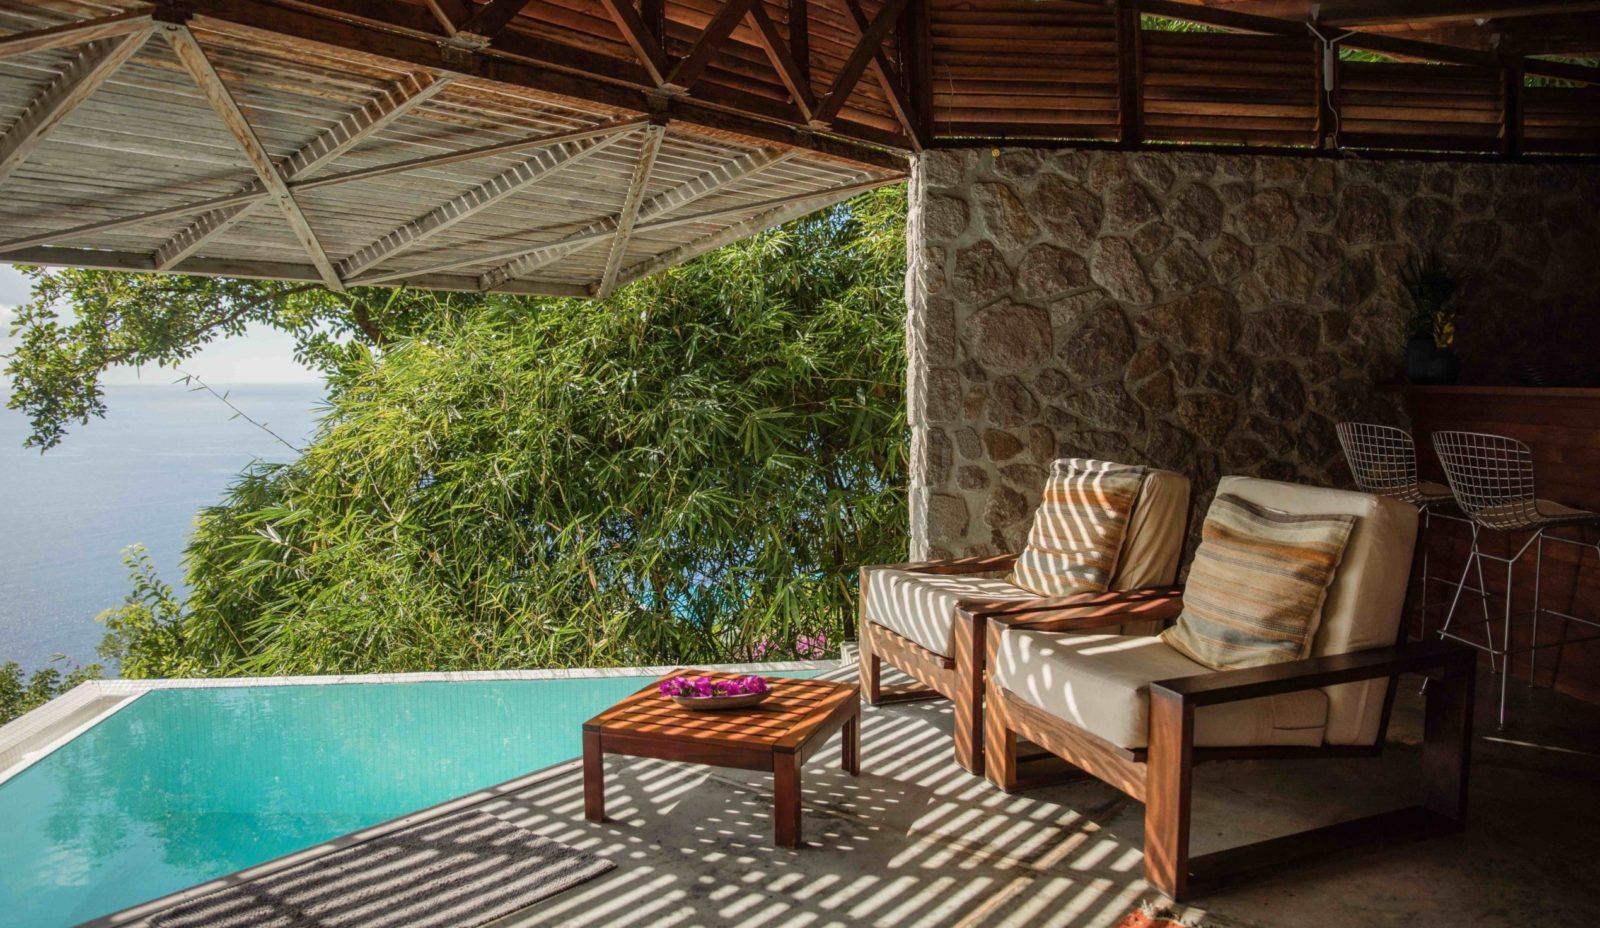 two armchairs have a table infront of them, looking onto the plunge pool and Caribbean Sea beyond